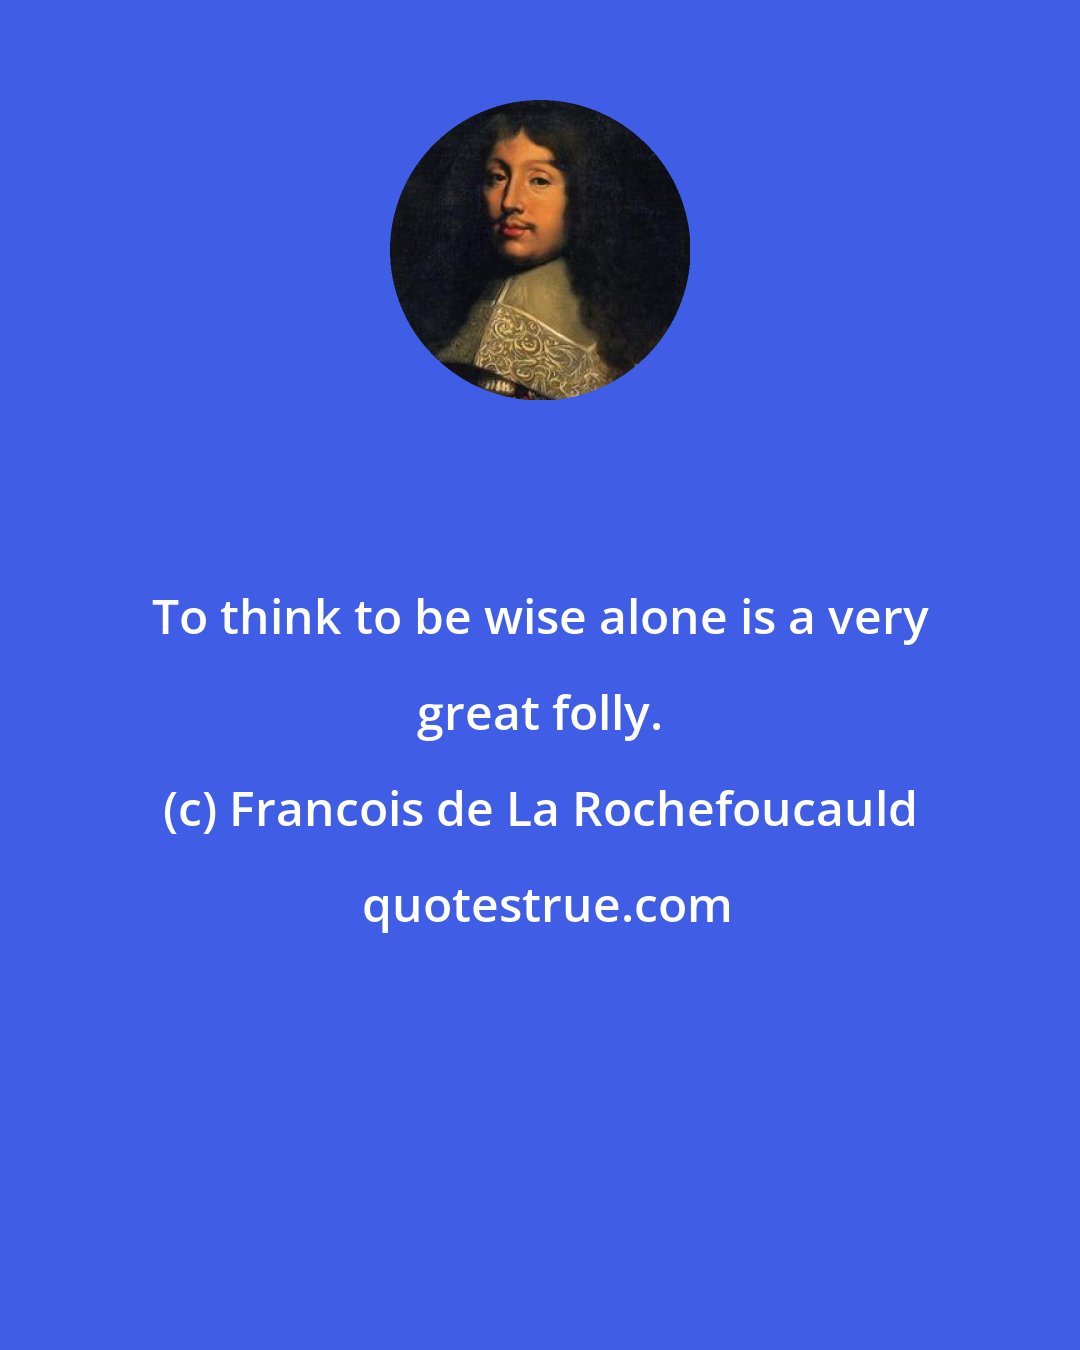 Francois de La Rochefoucauld: To think to be wise alone is a very great folly.